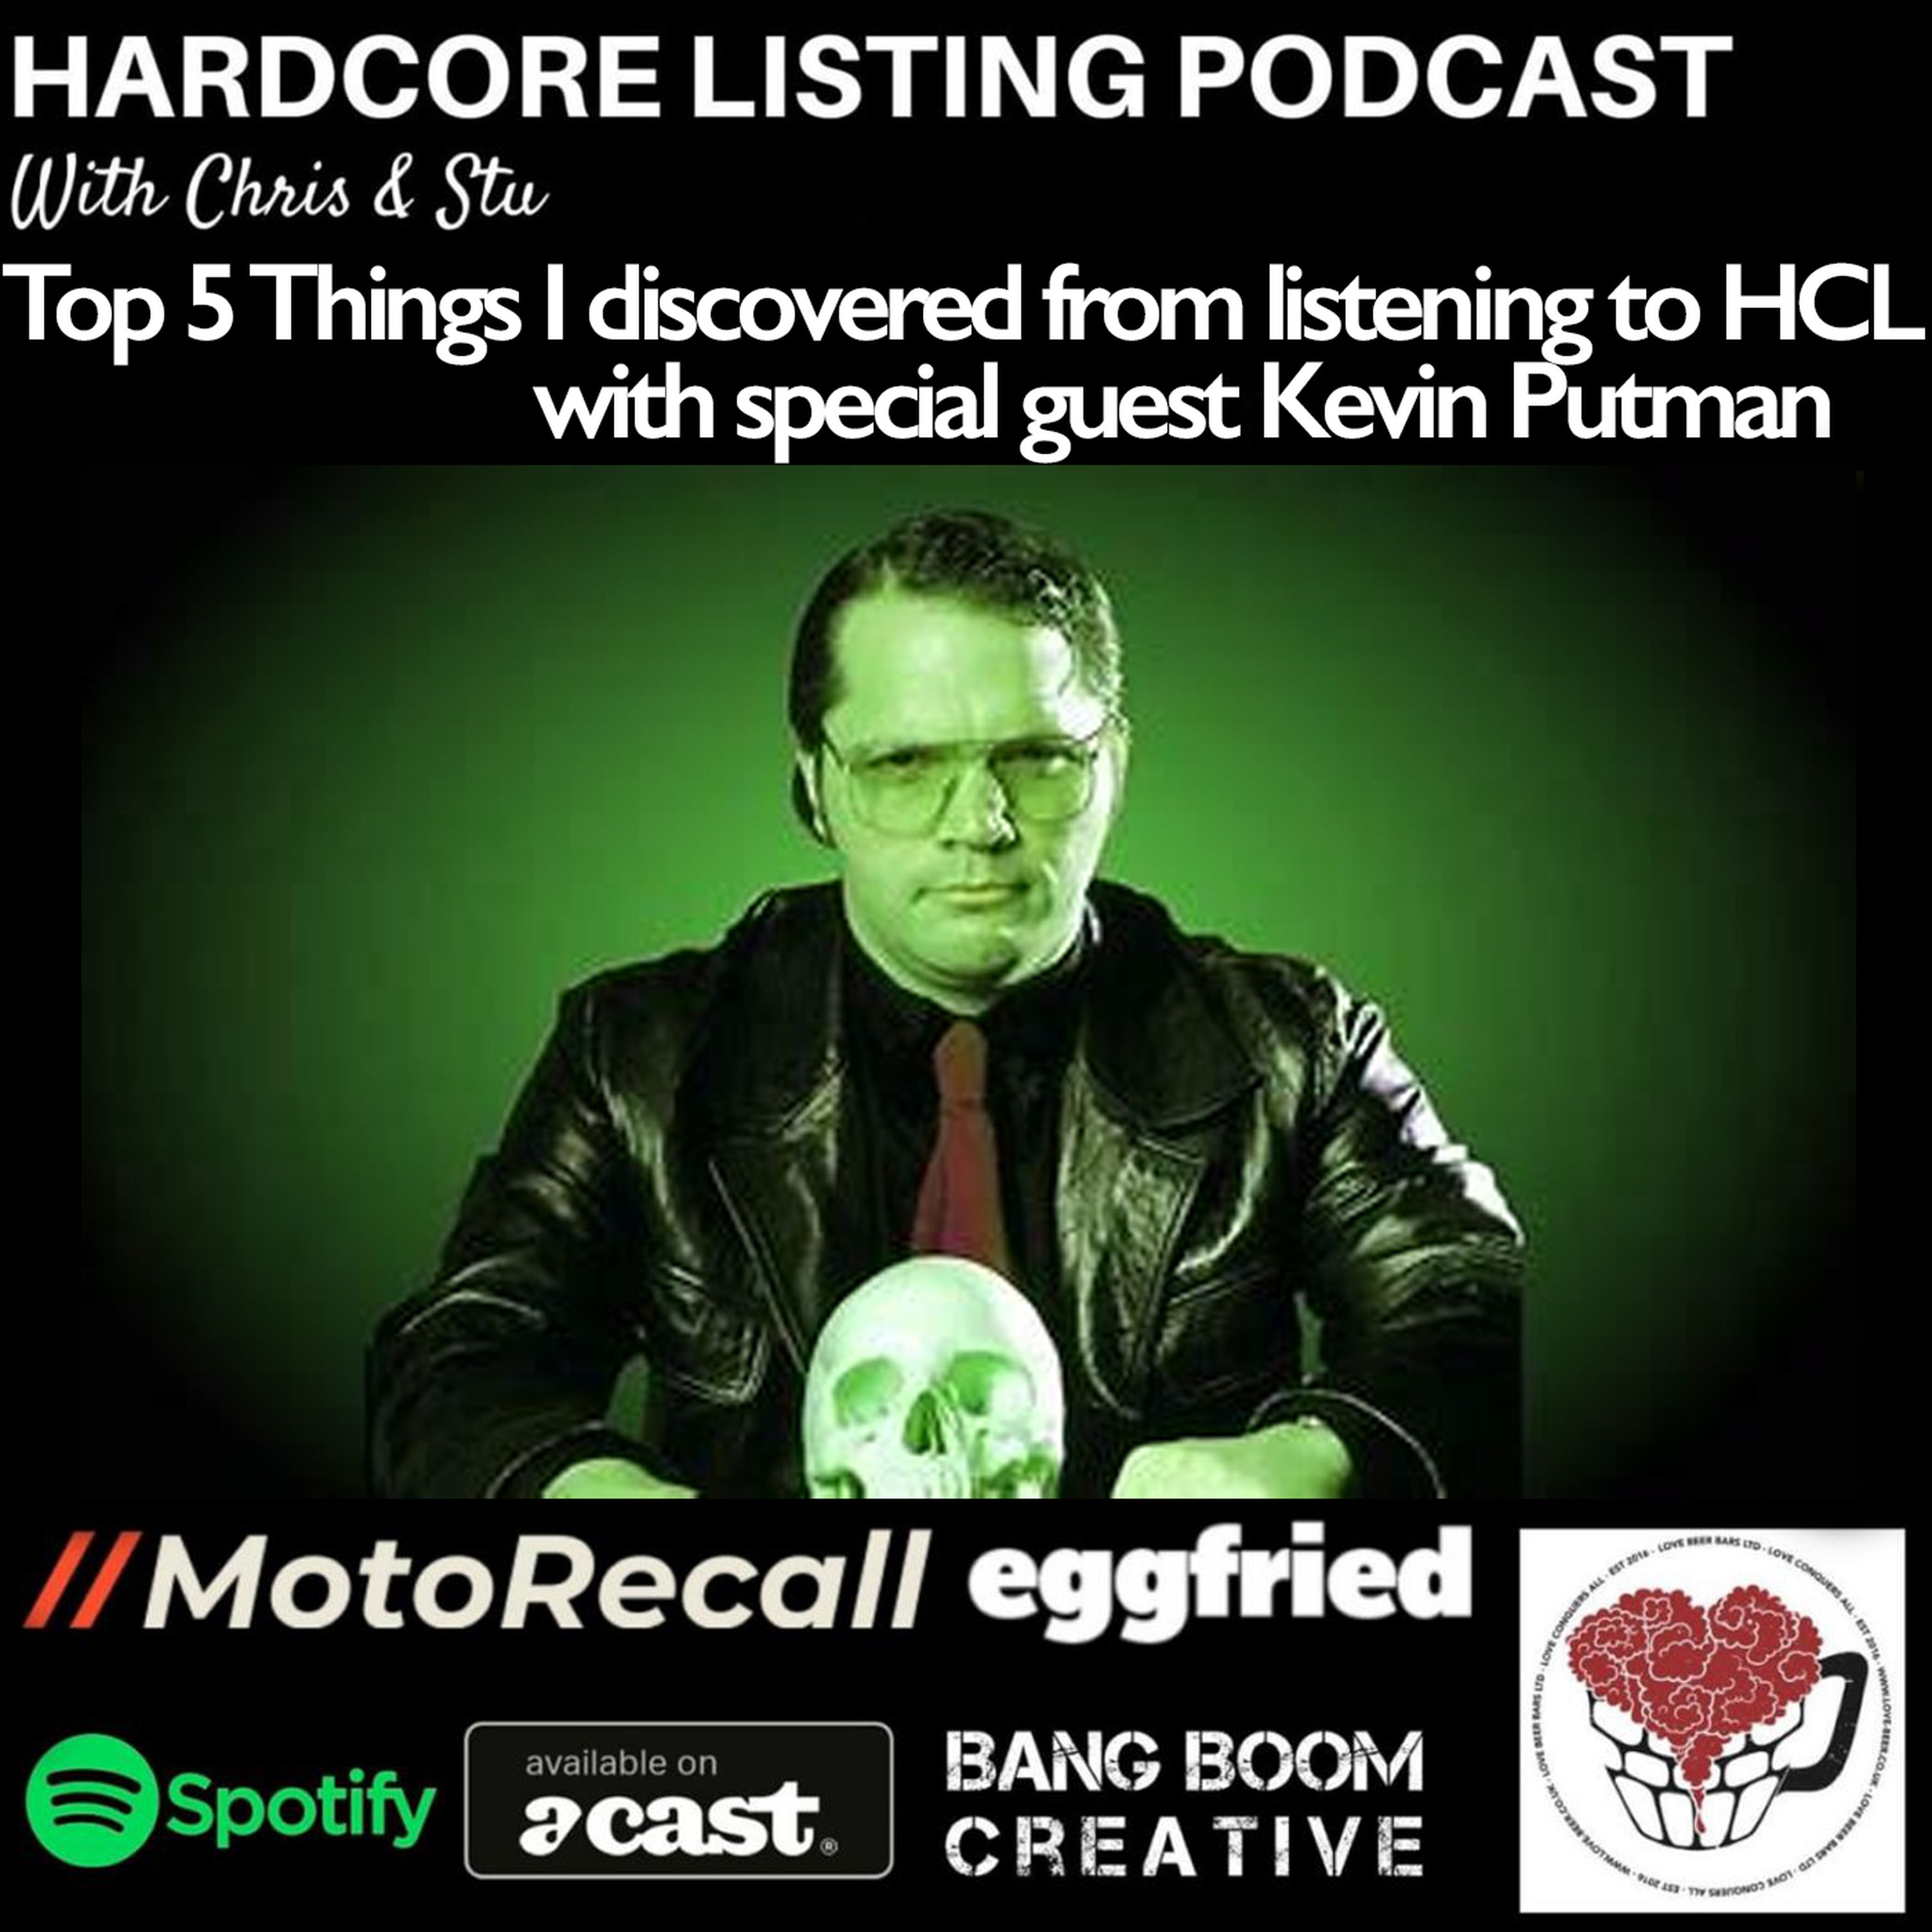 Top 5 Things I discovered from listening to HCL. With special guest Kevin Putman